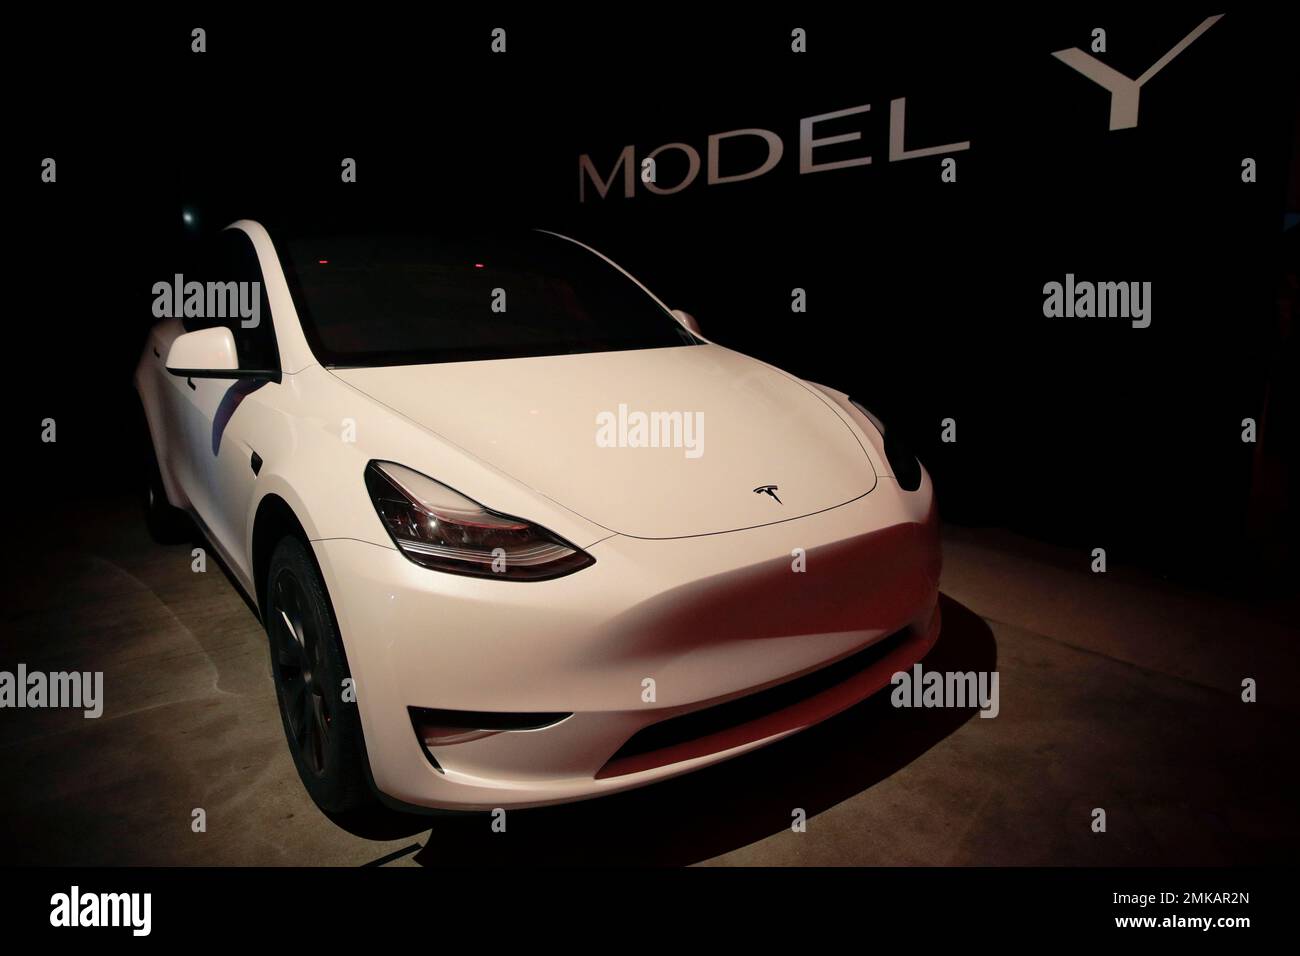 Tesla's Model Y is displayed at Tesla's design studio Thursday, March 14,  2019, in Hawthorne, Calif. The Model Y may be Tesla's most important  product yet as it attempts to expand into